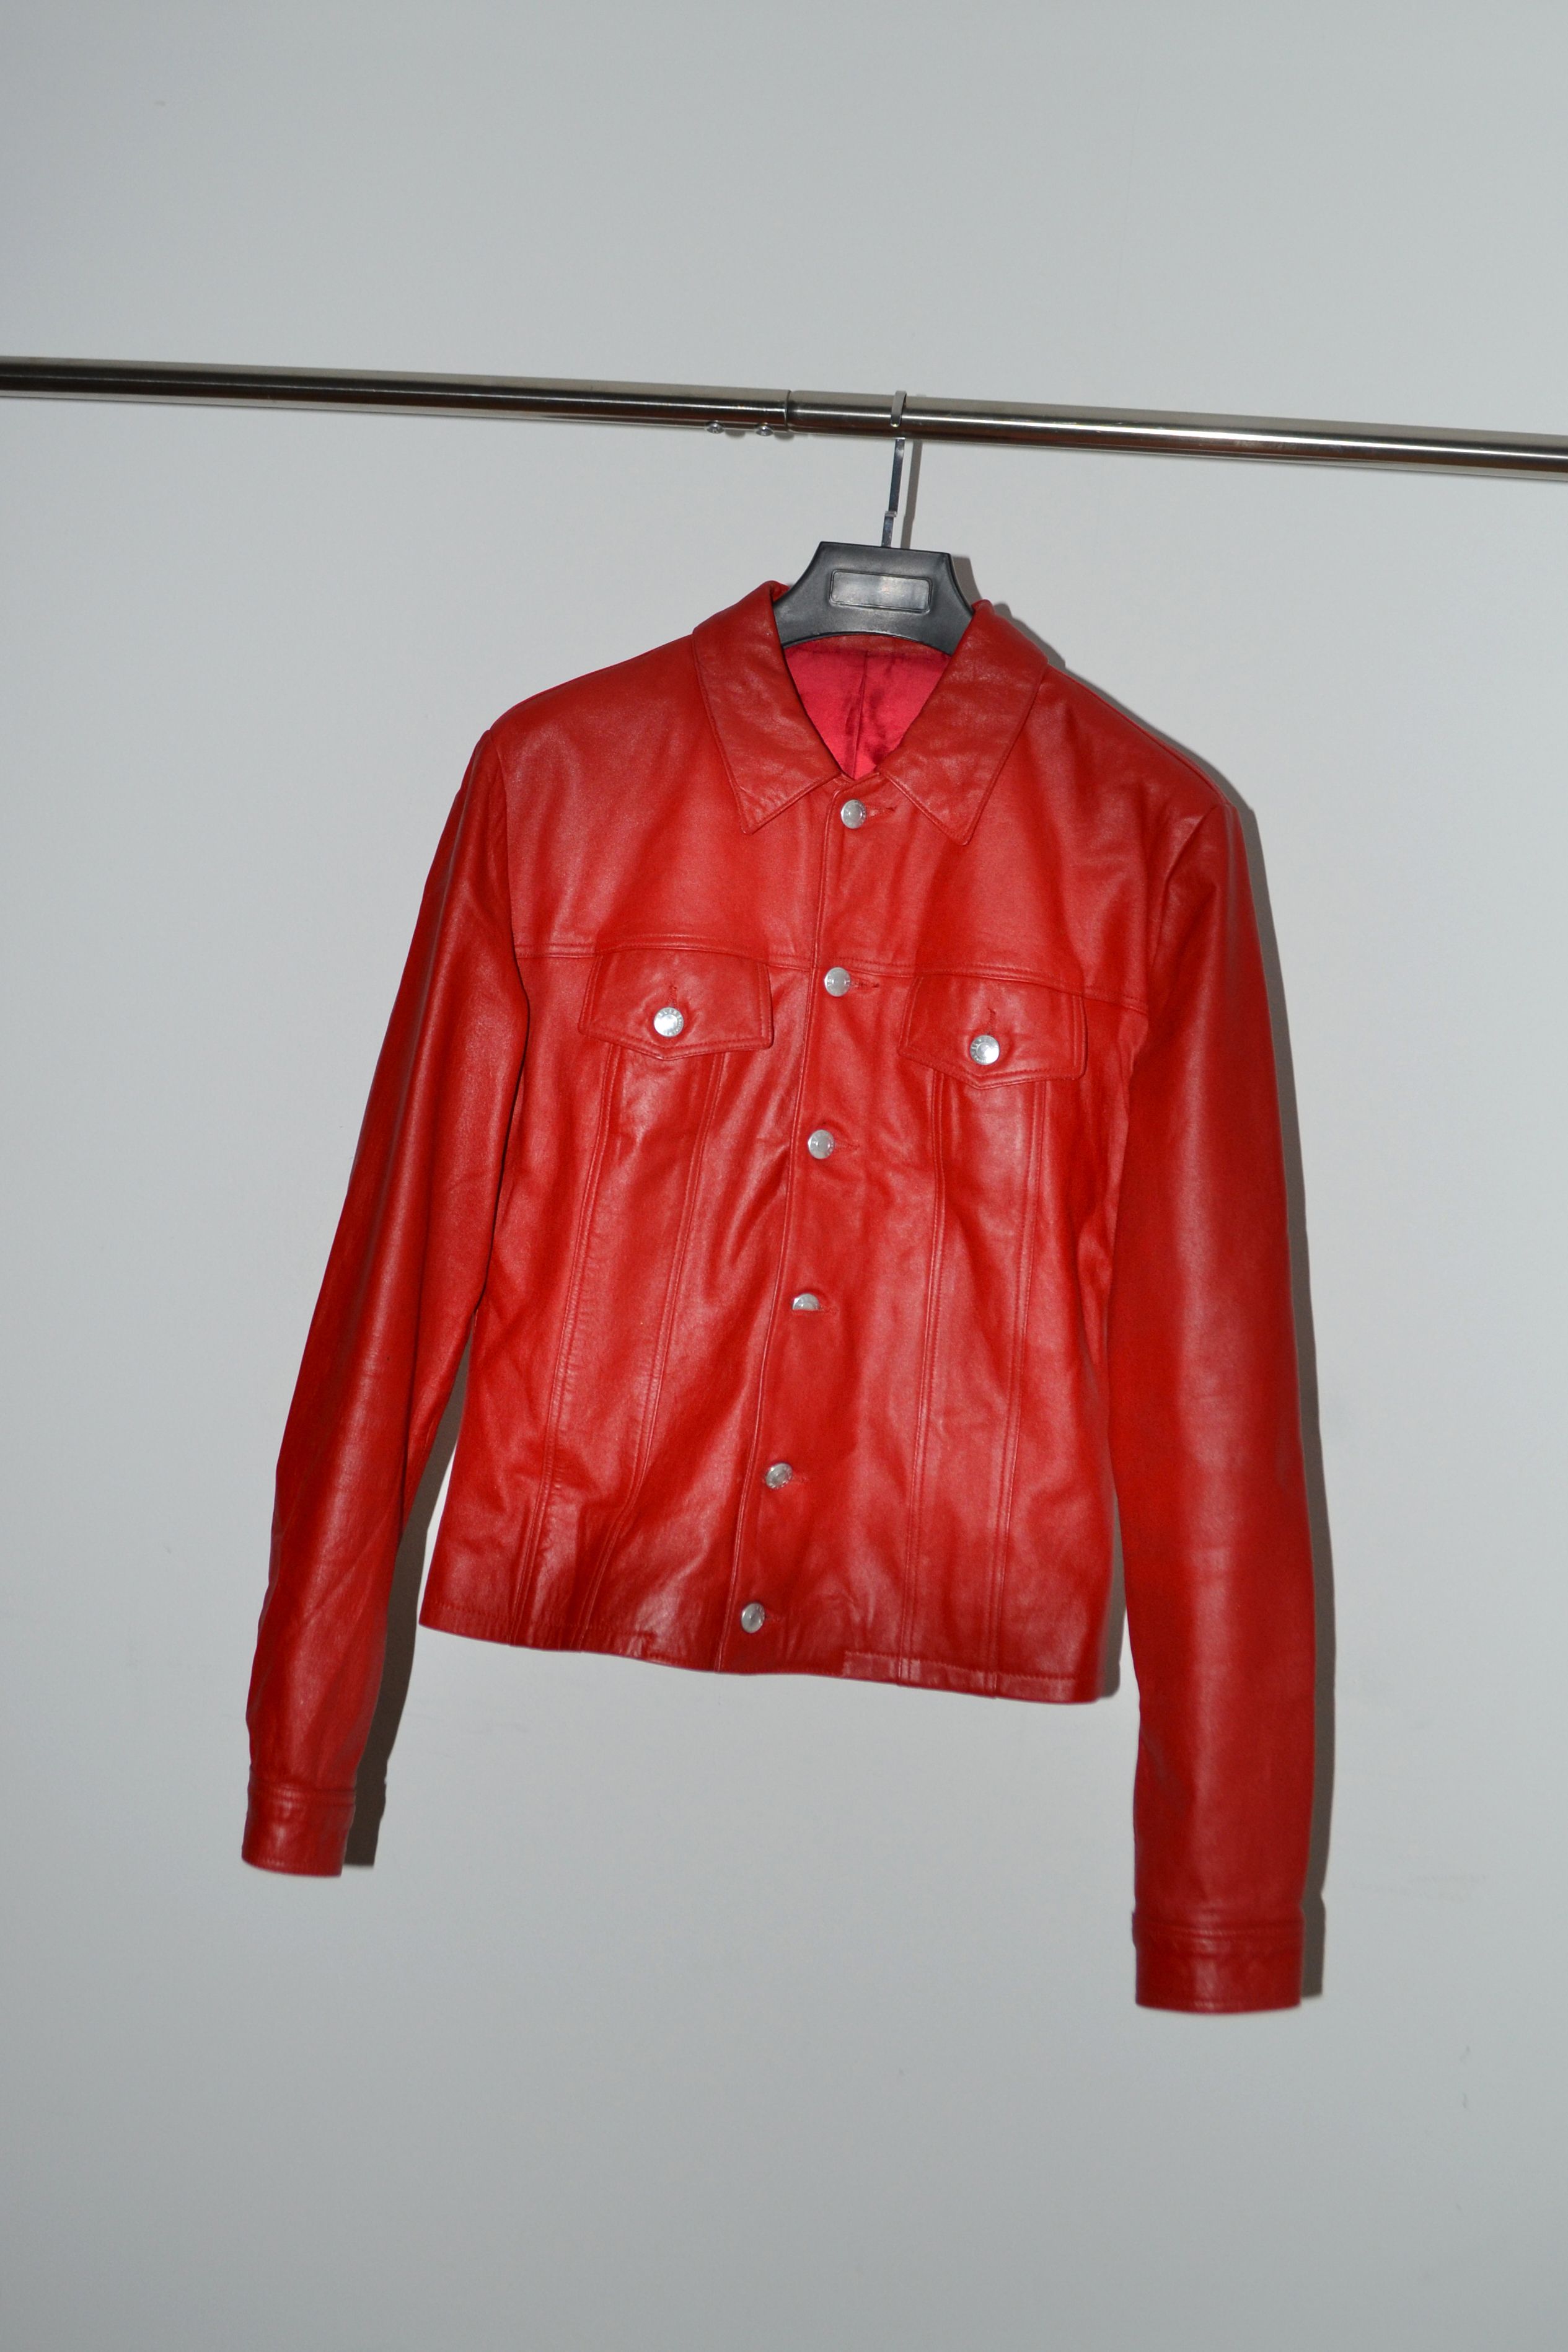 Pre-owned Helmut Lang Ss1997 Hemless Prototype Leather Trucker Jacket In Red